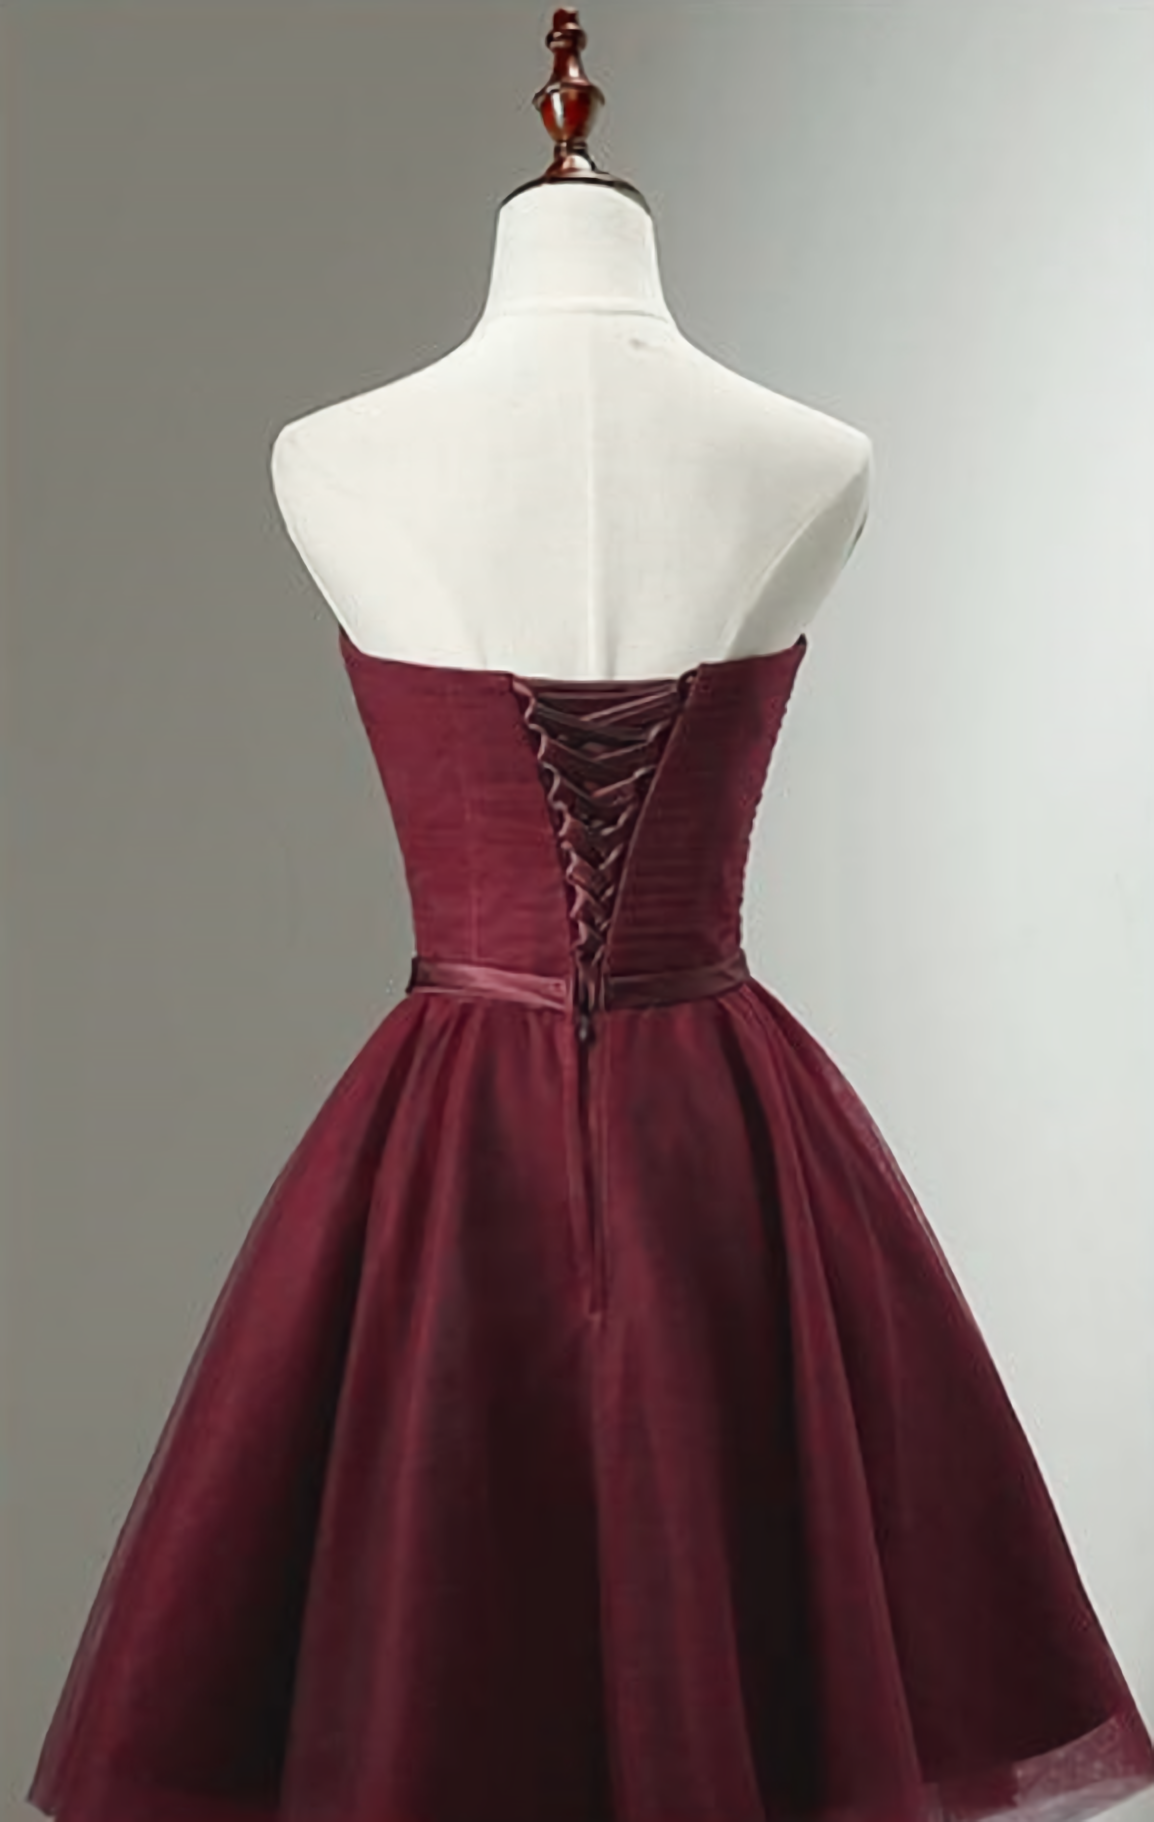 Party Dress Dress, Beautiful Burgundy Knee Length Lace Up Tulle Party Dress, Homecoming Dress, Short Prom Dress